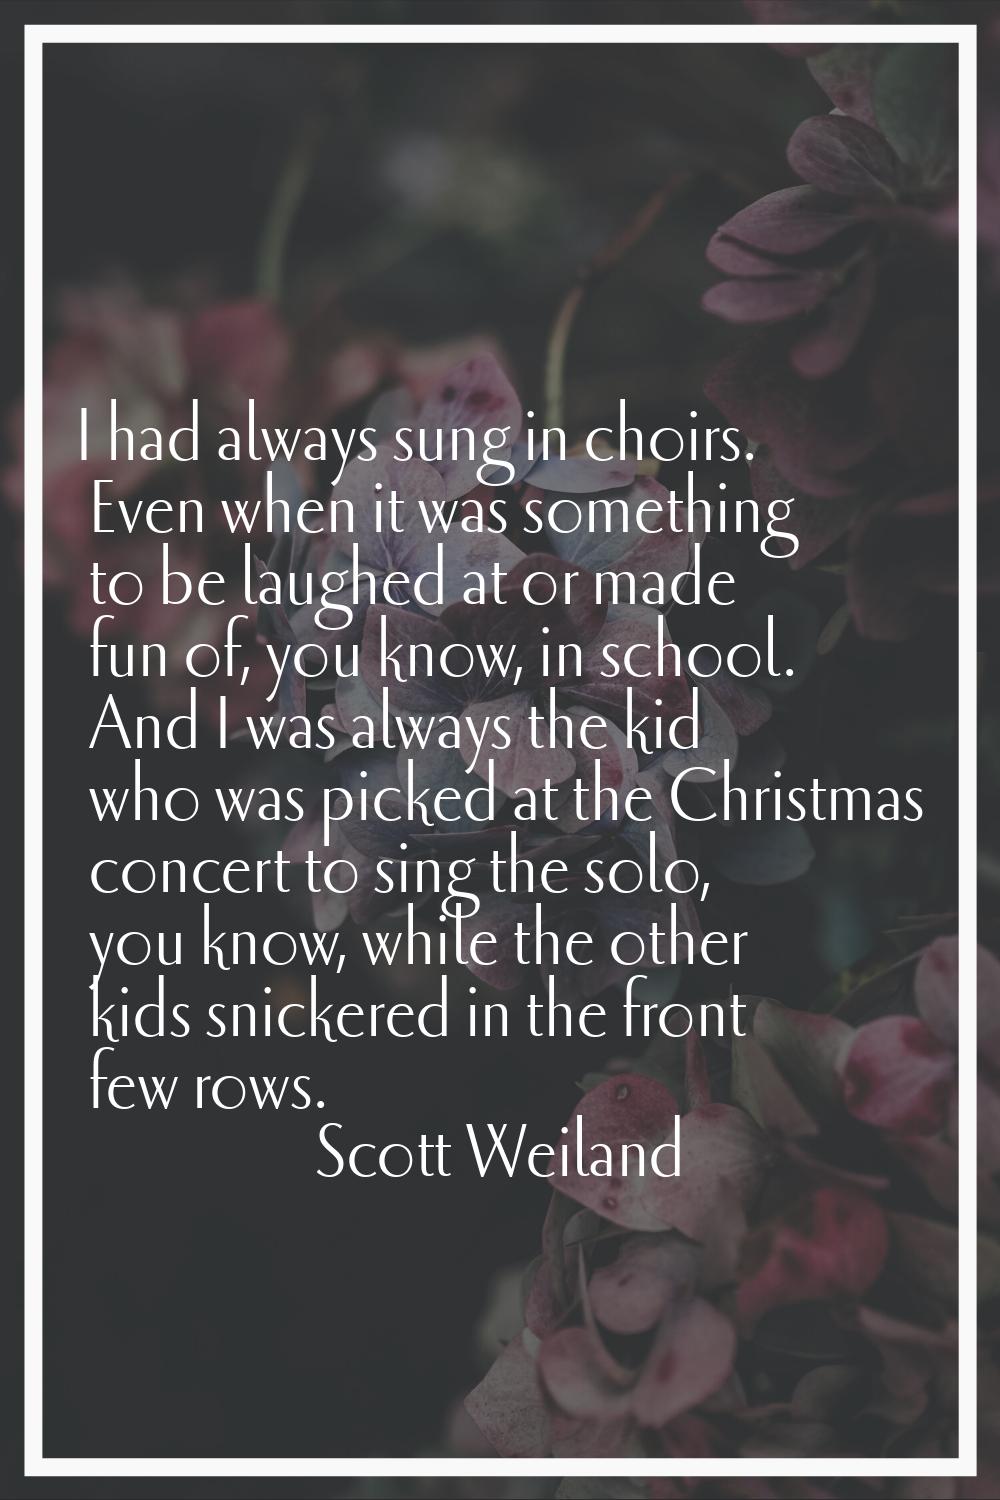 I had always sung in choirs. Even when it was something to be laughed at or made fun of, you know, 